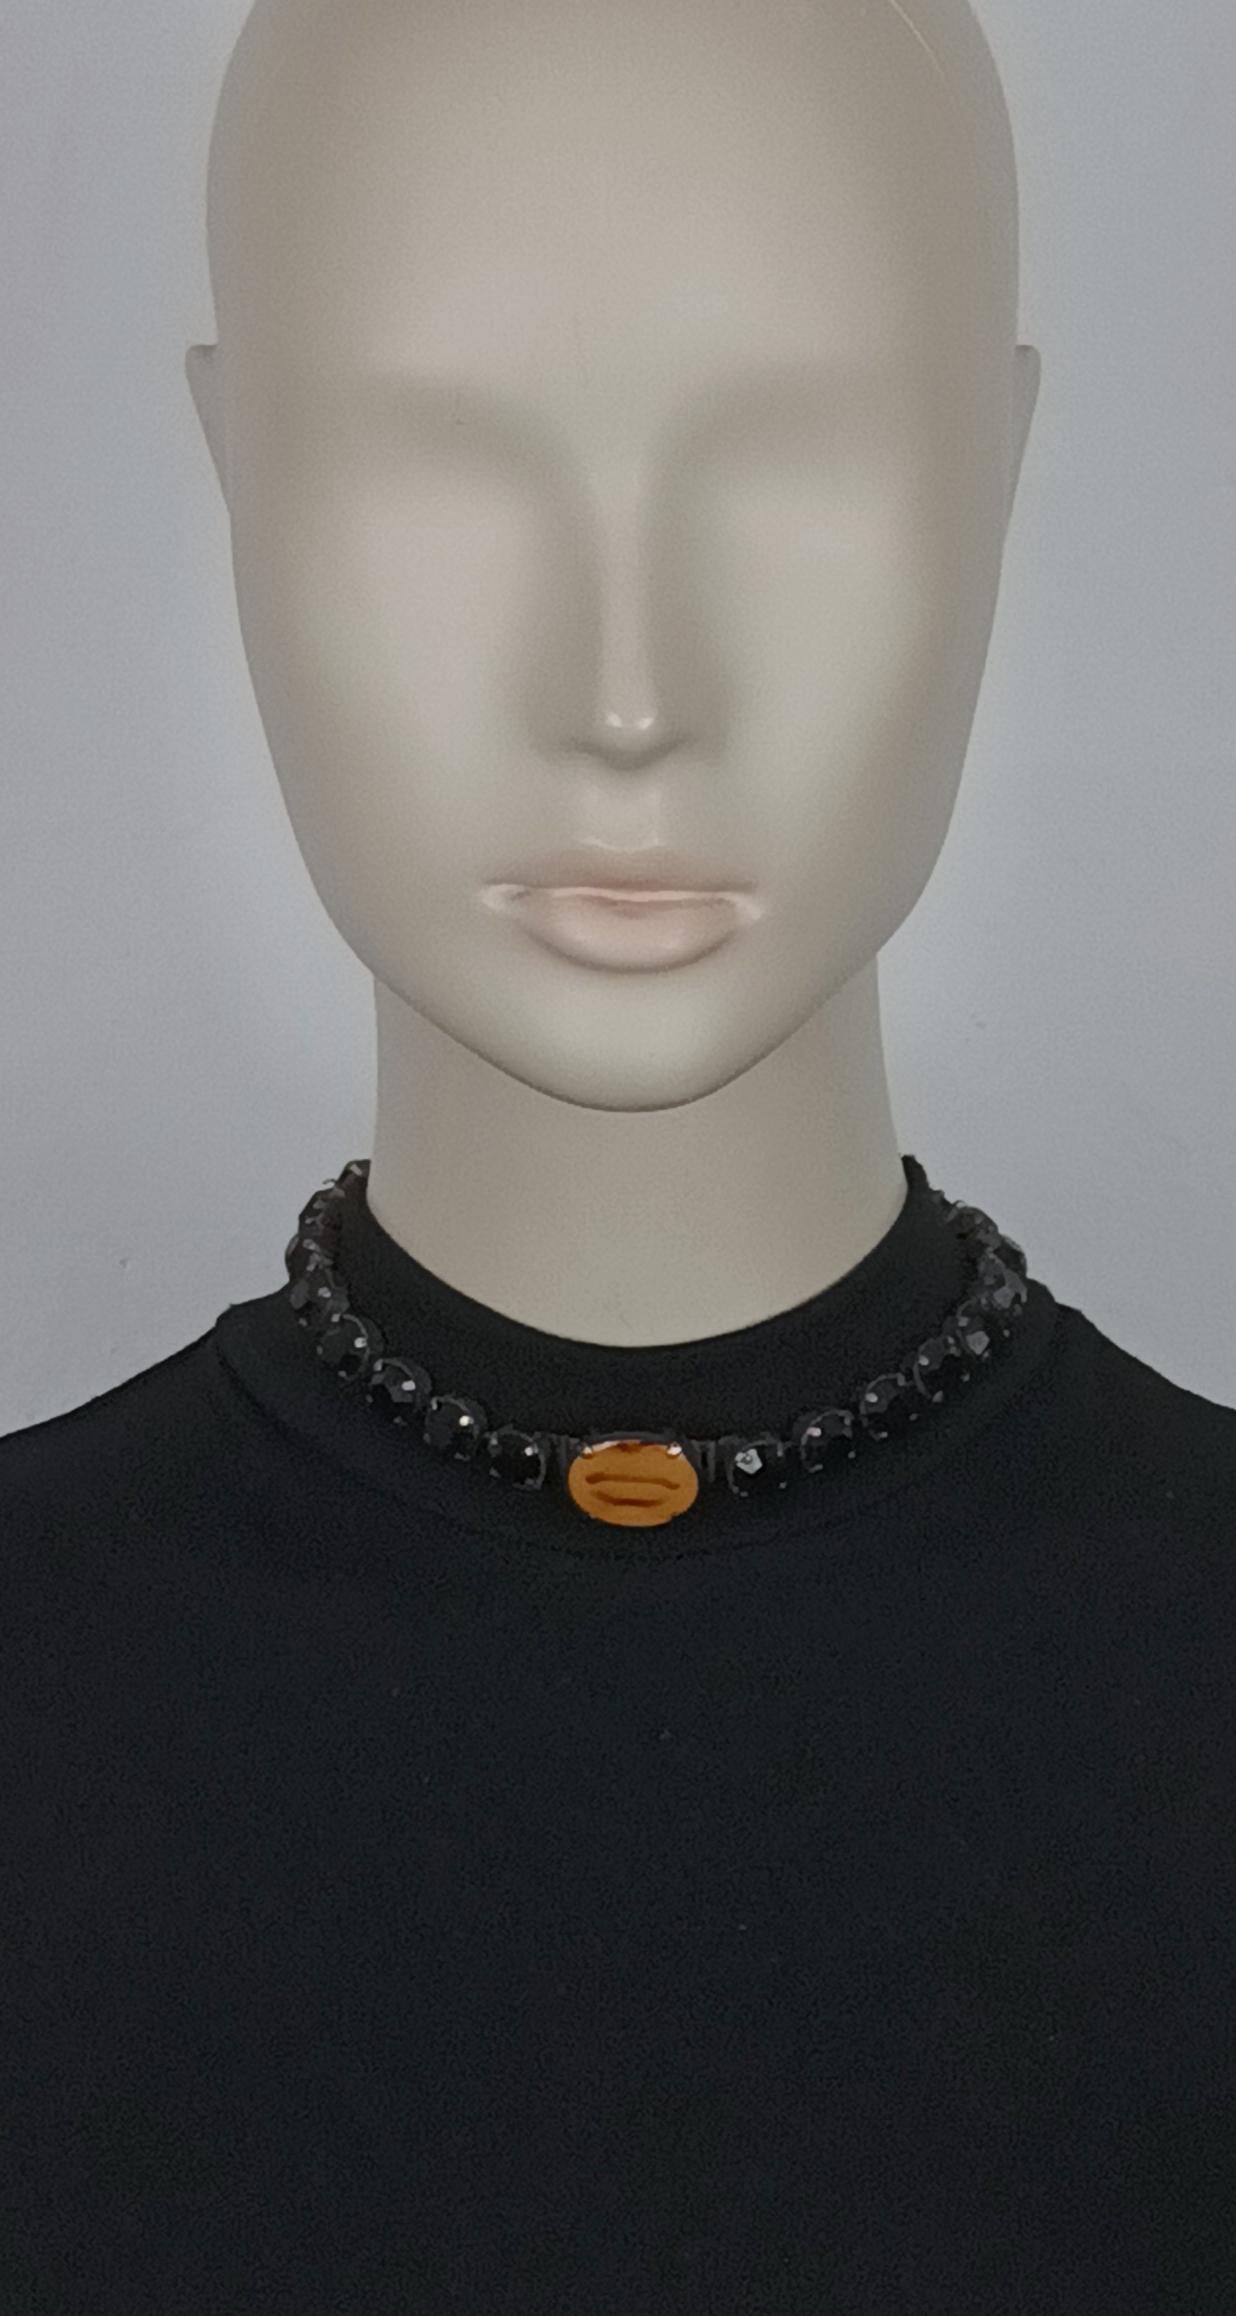 JEAN PAUL GAULTIER vintage antiqued silver tone necklace embellished with large black crystals and a mouth print resin cameo at the center.

Box clasp closure.
Secure closure.

Marked JPG.

Indicative measurements : length approx. 35.5 cm (13.98